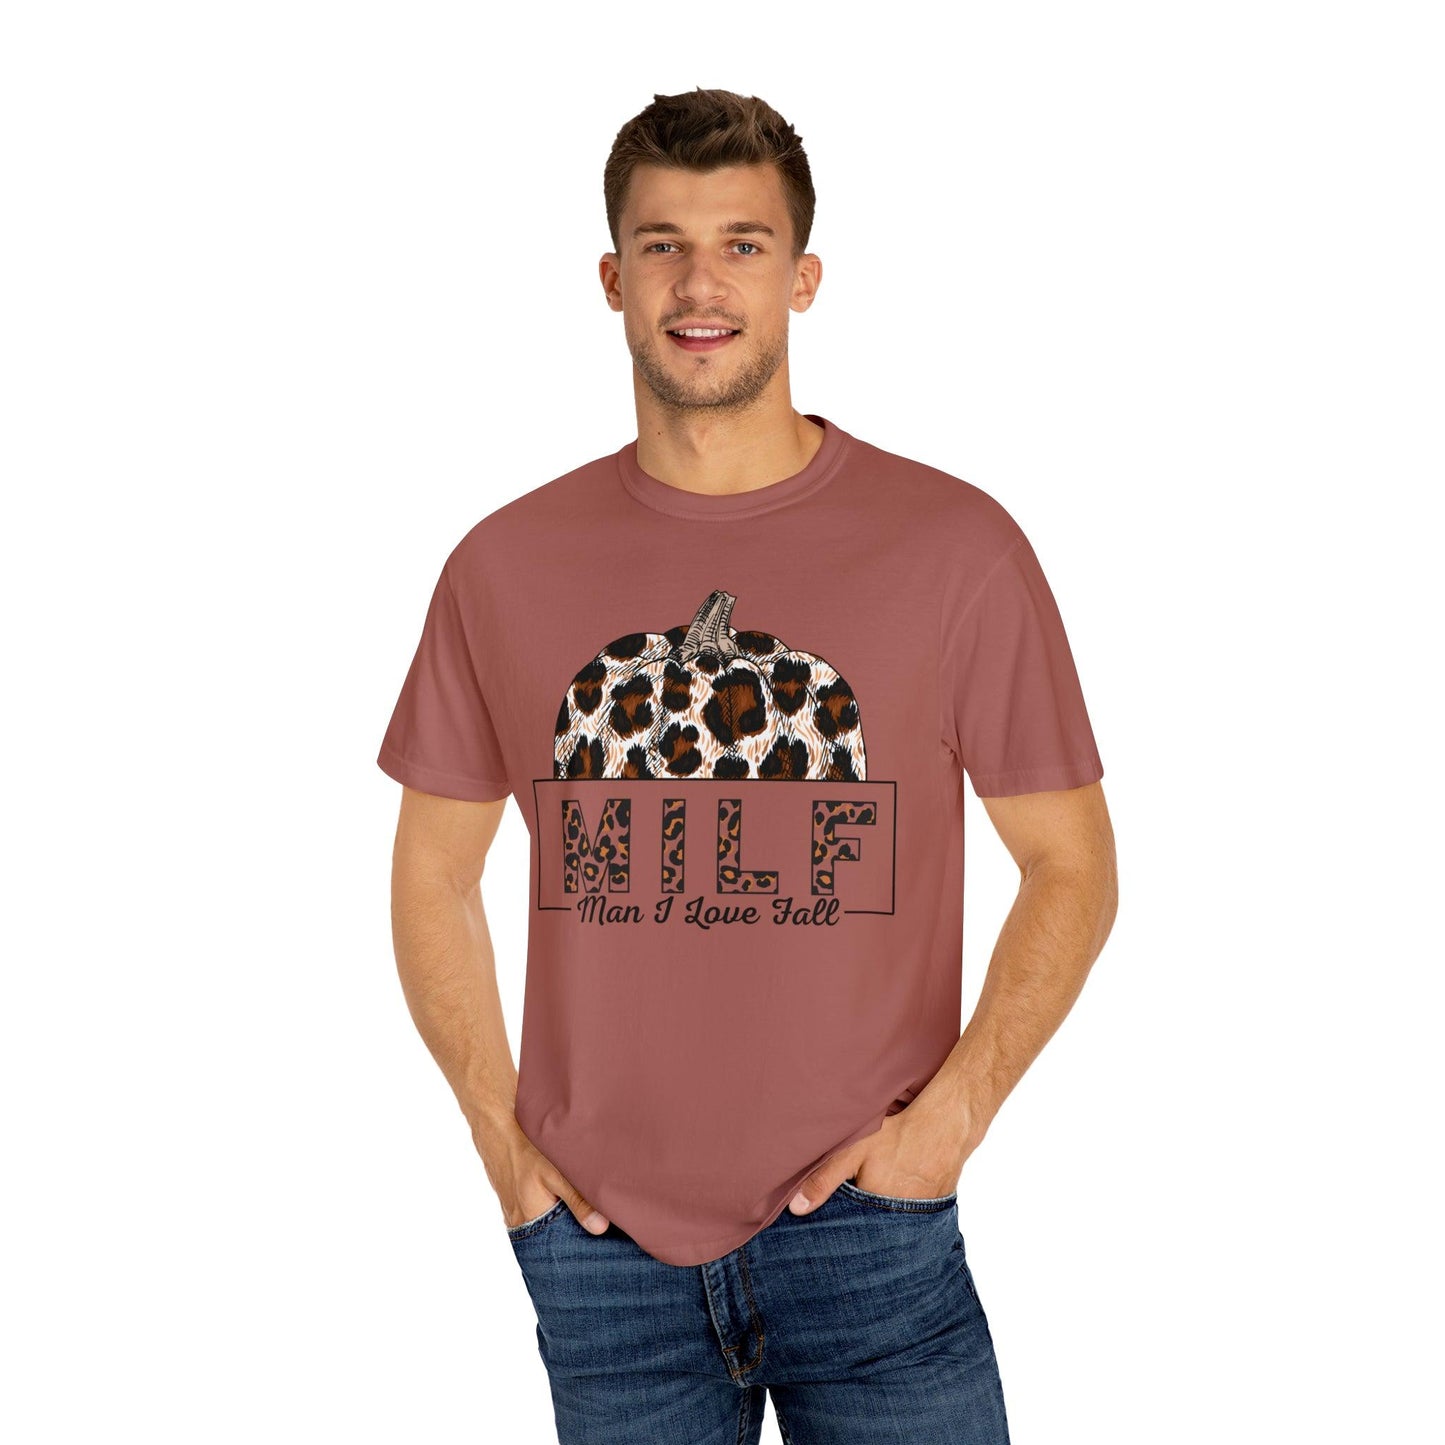 MILF Man I love Fall Gift for Fall Lover Shirt, Comfort Colors Funny Fall Shirts Gift, Thanksgiving Gift, Funny Halloween Shirts Sarcastic